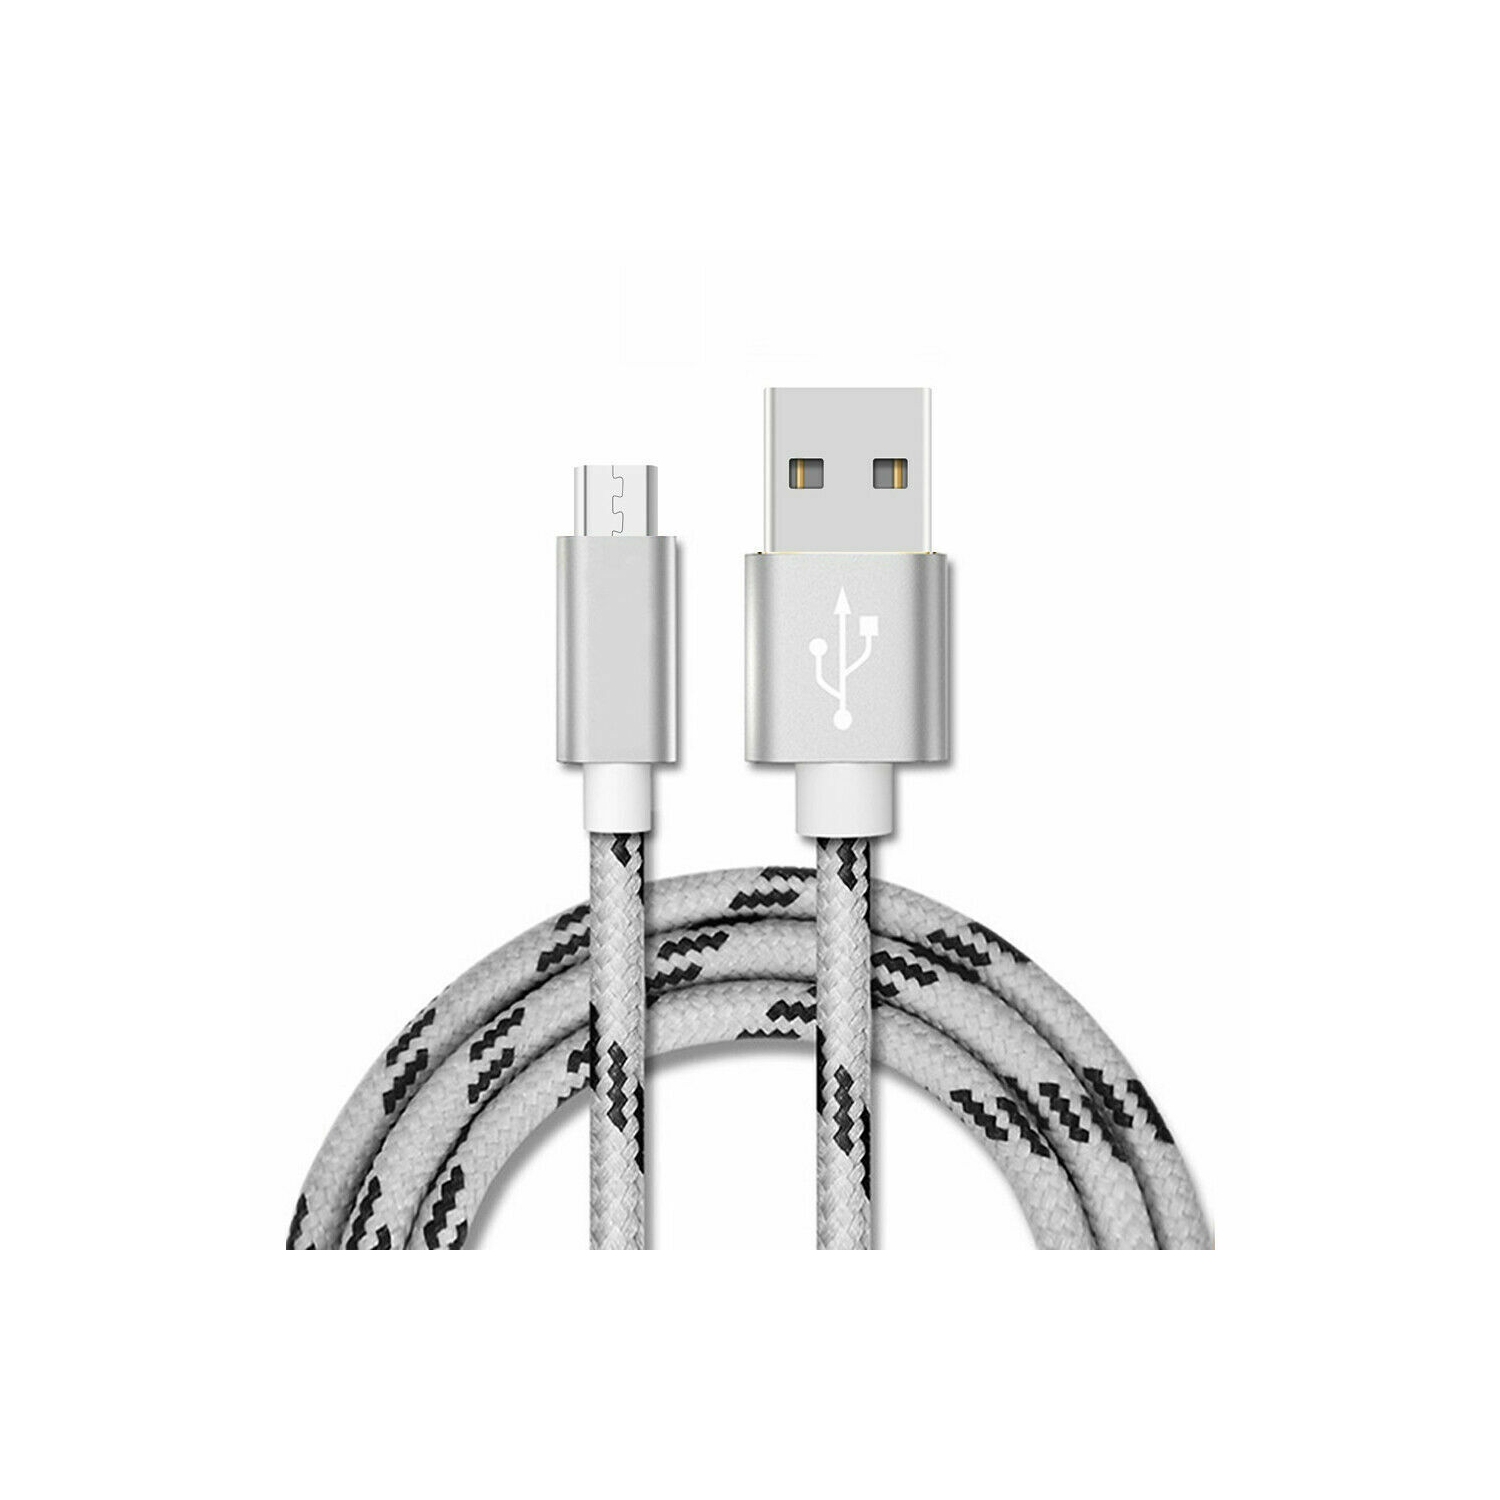 [2Pack] USB Type C Cable, Fast Charging /Sync Data Cable Cord, Samsung Galaxy S23 S22 S21 S10 S9 S8 S20 Plus Note Ultra A22 A42 A52 A72 A53 A71 Braided Long Cable (1 Meter)